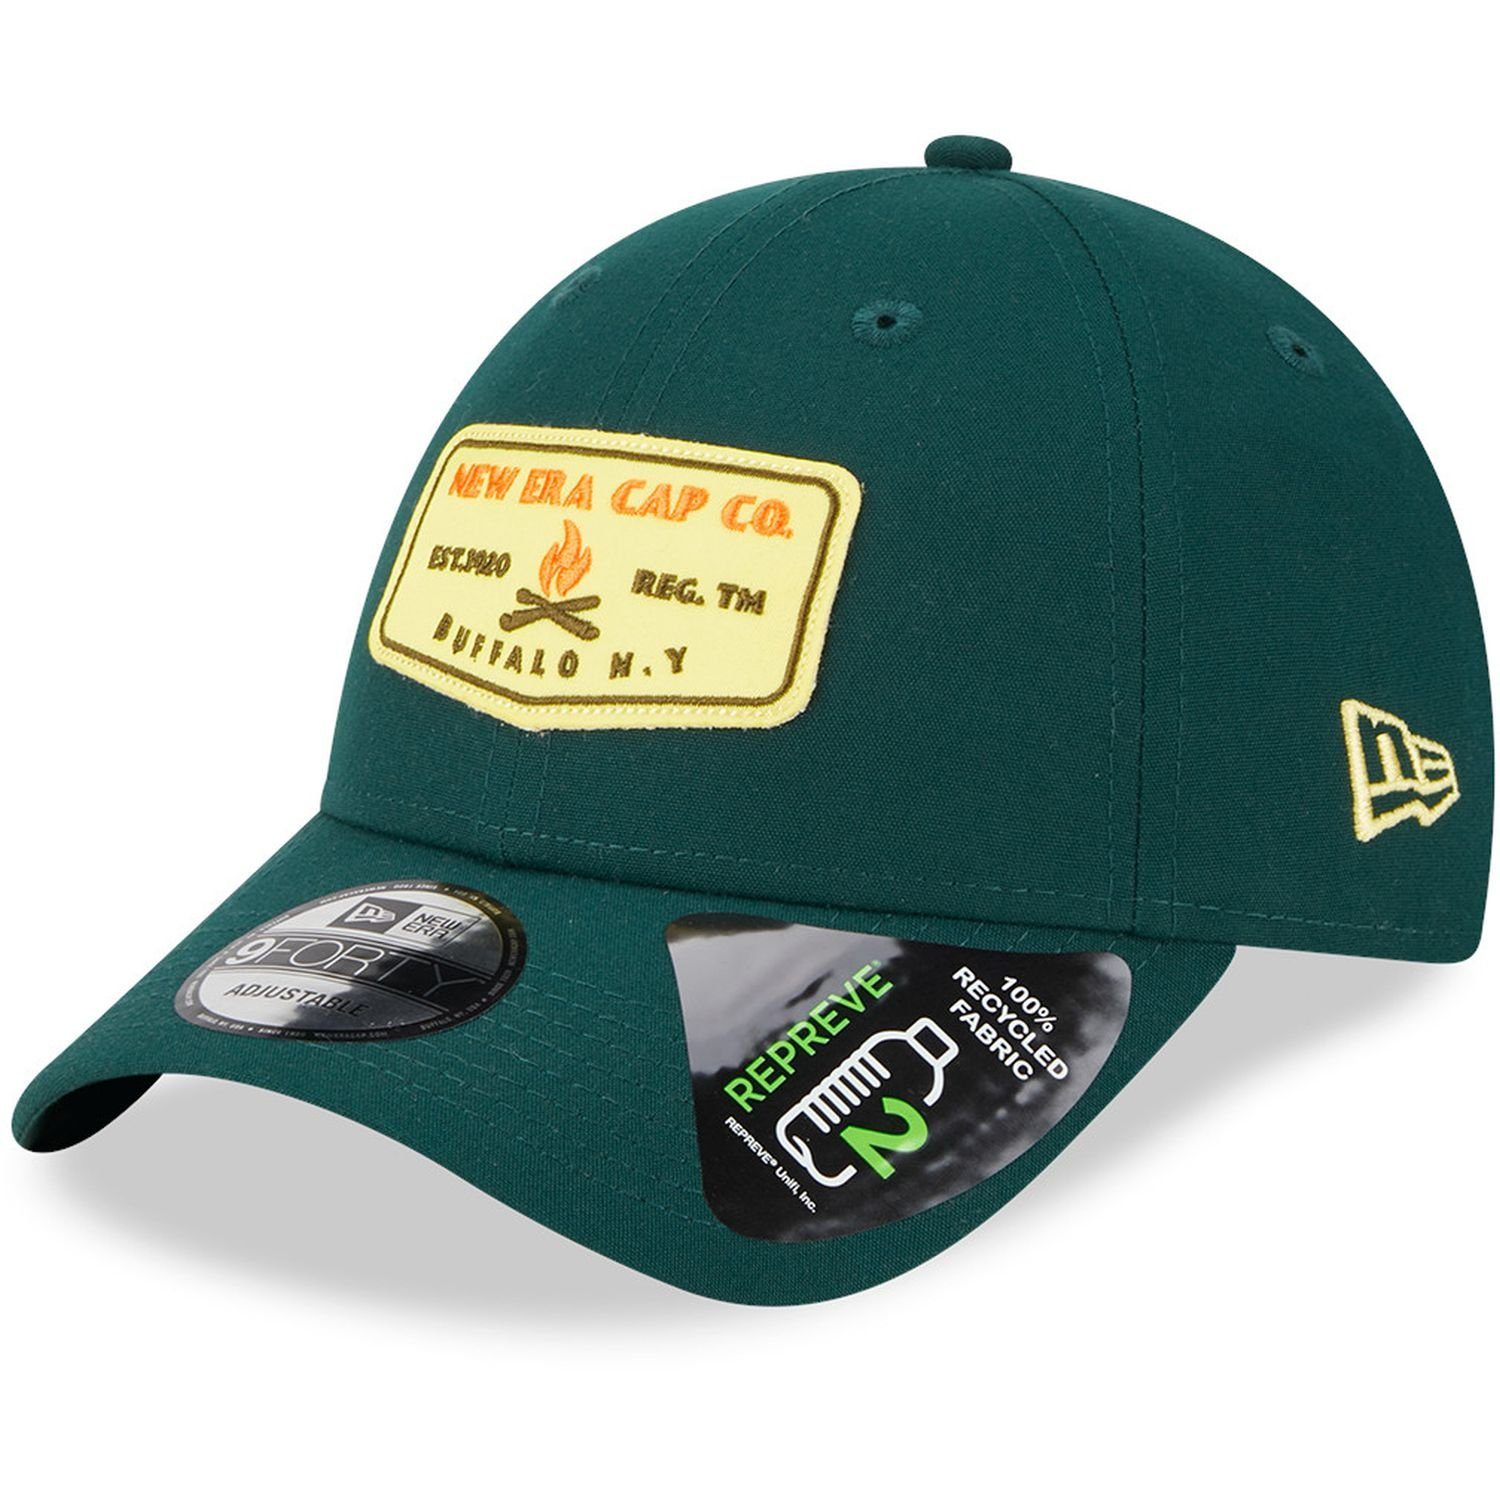 New Era Trucker Cap 9Forty Strapback HERITAGE BRAND PATCH forest